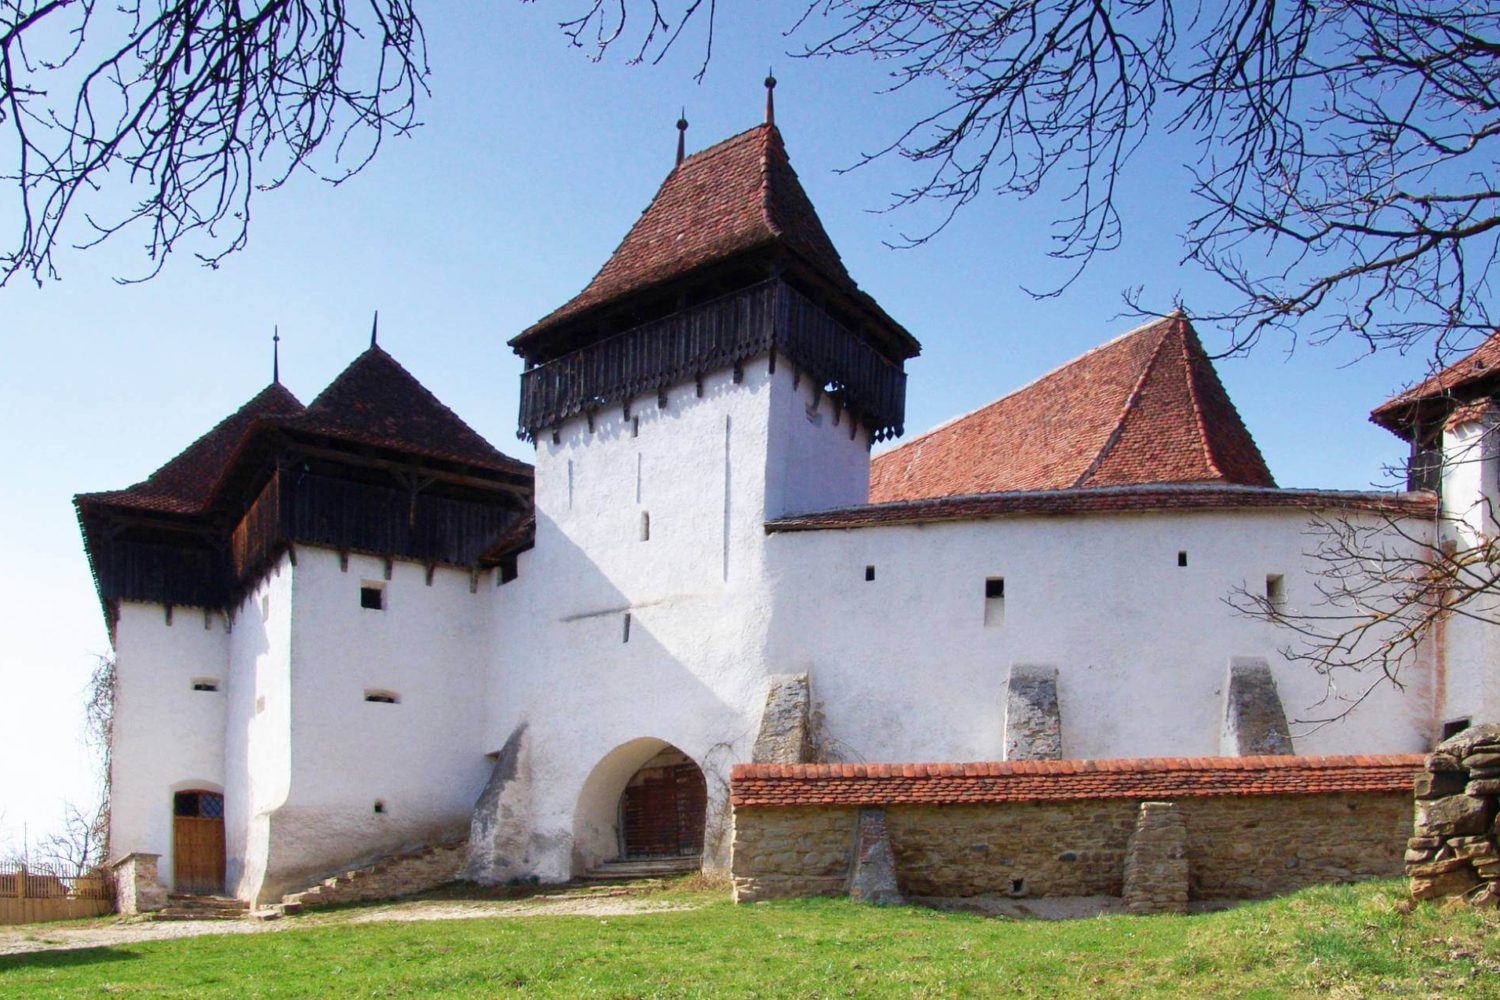 Transylvanian Medieval Castles & Fortified Churches